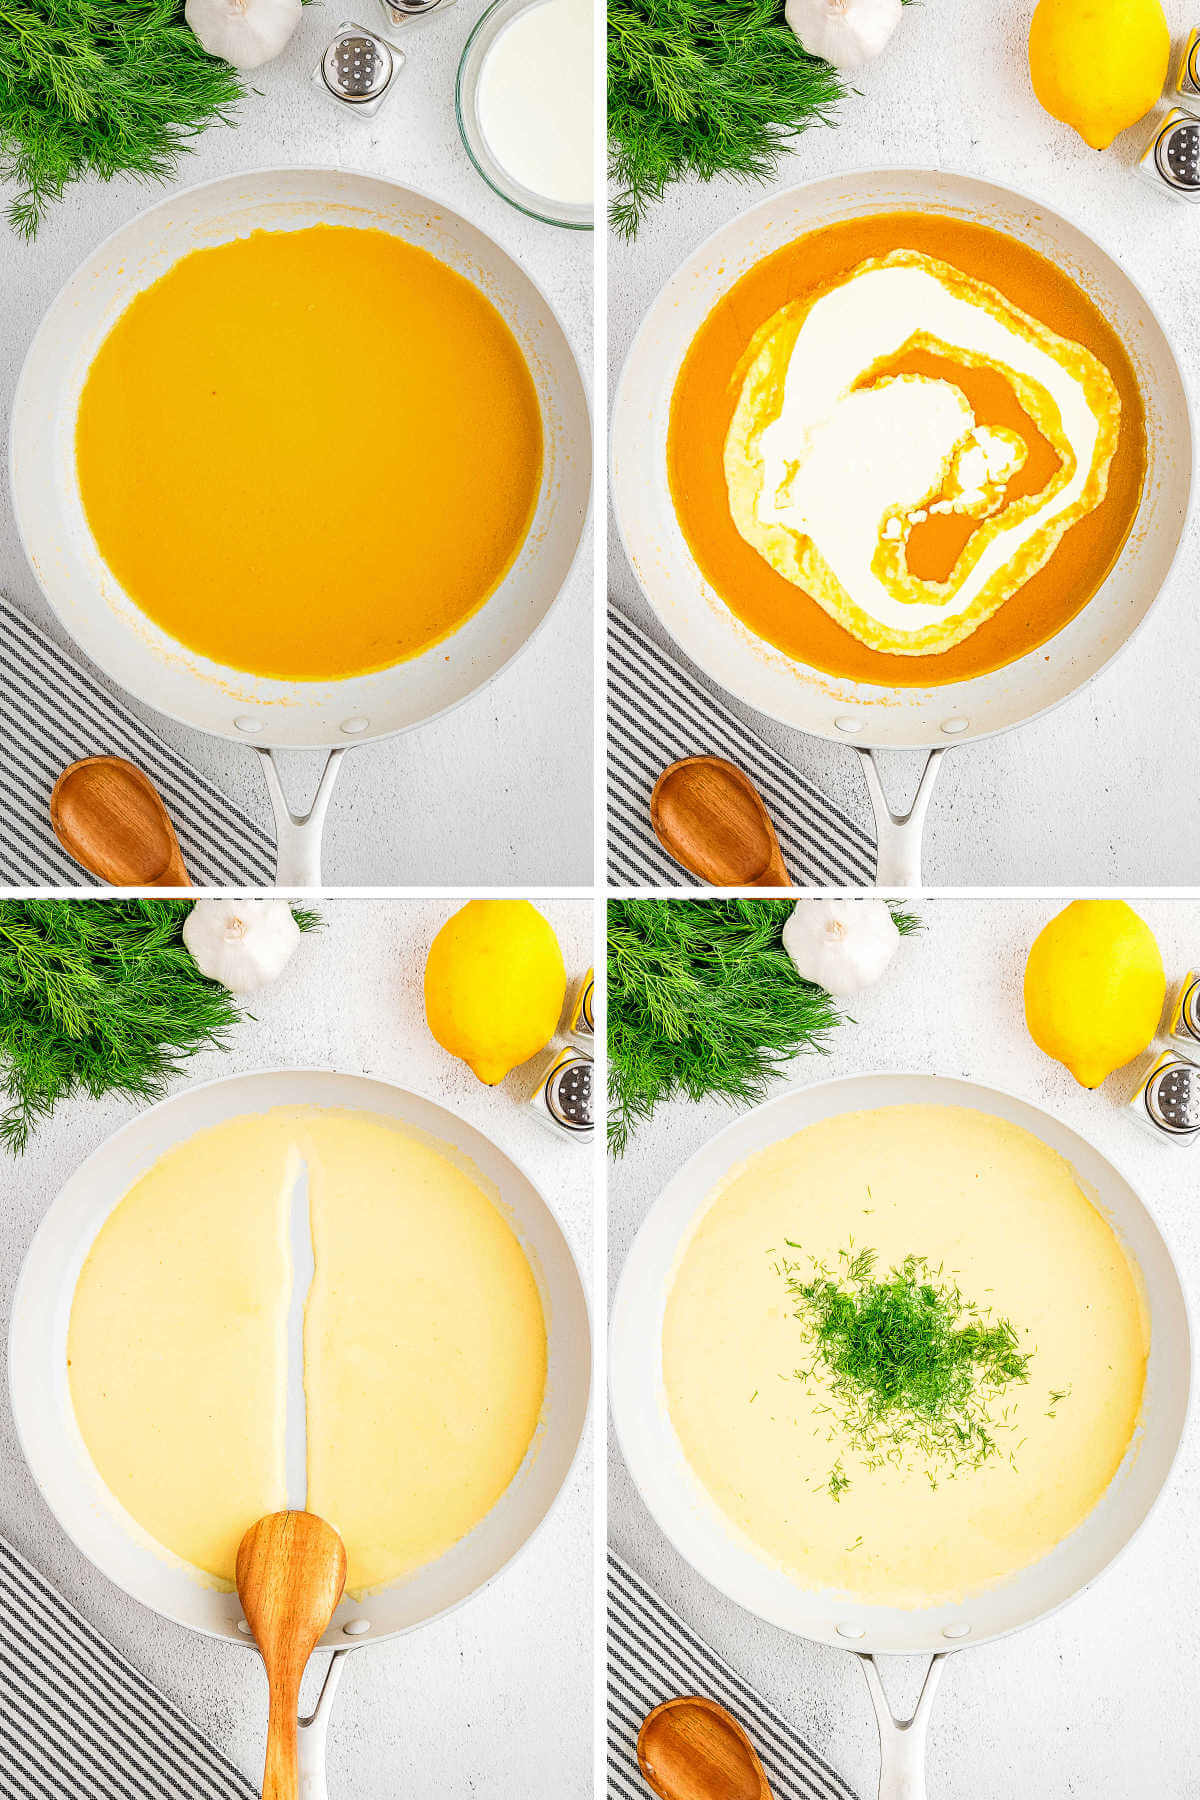 Process steps for making dill cream sauce in a skillet.